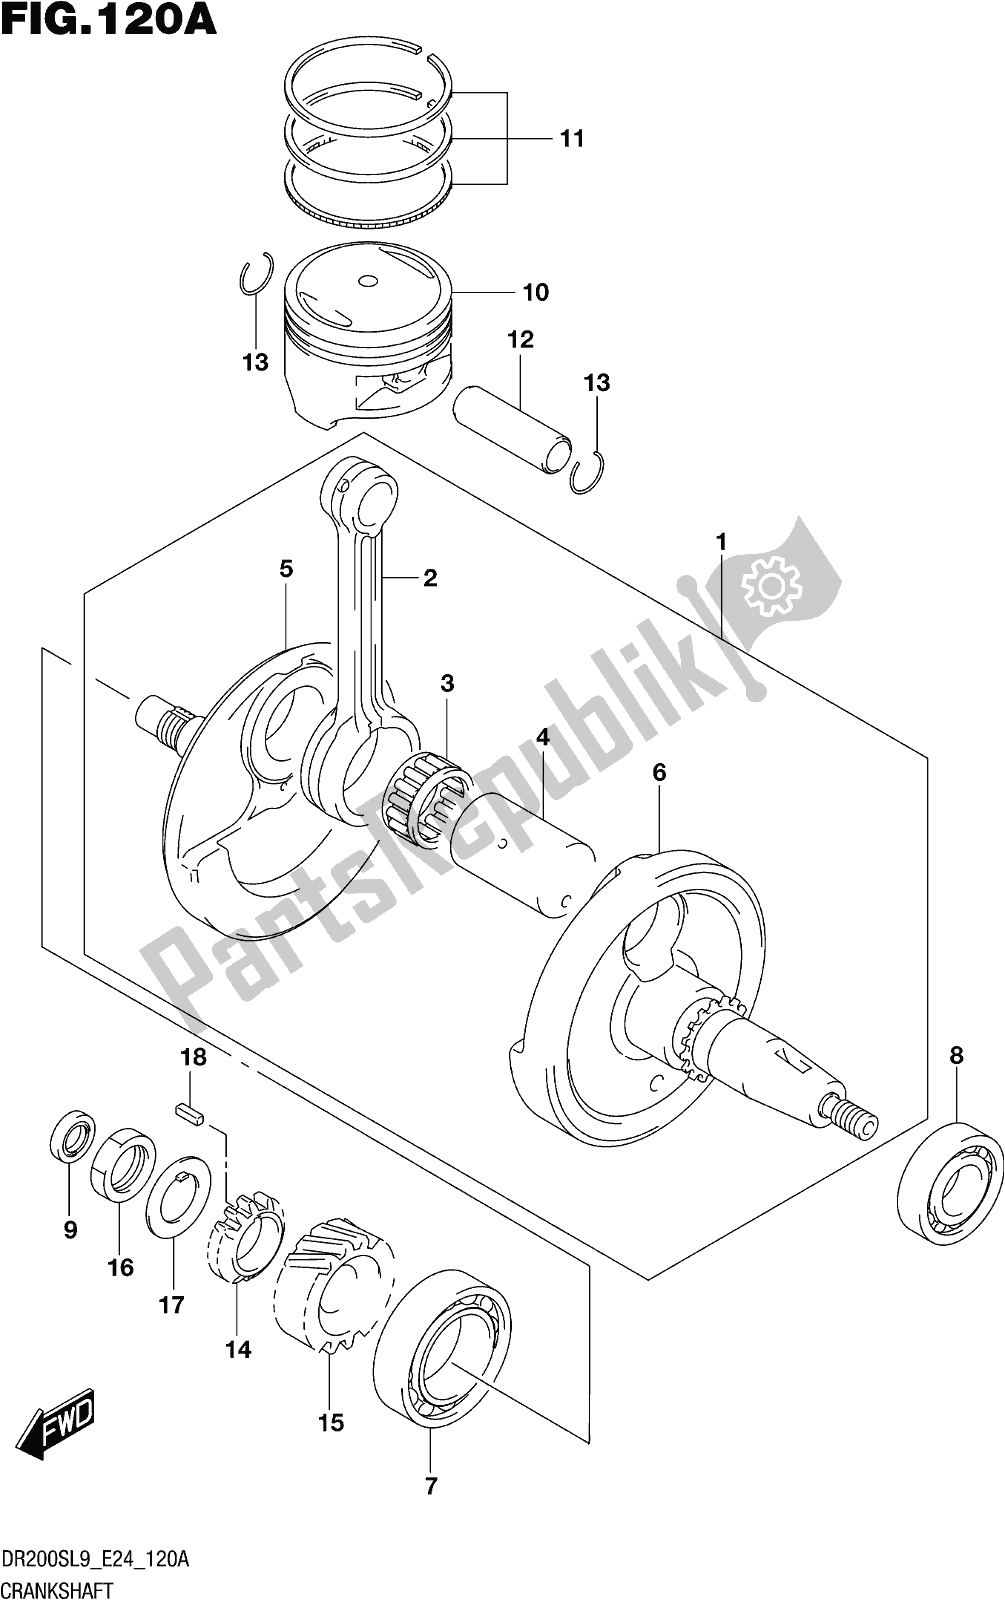 All parts for the Fig. 120a Crankshaft of the Suzuki DR 200S 2019